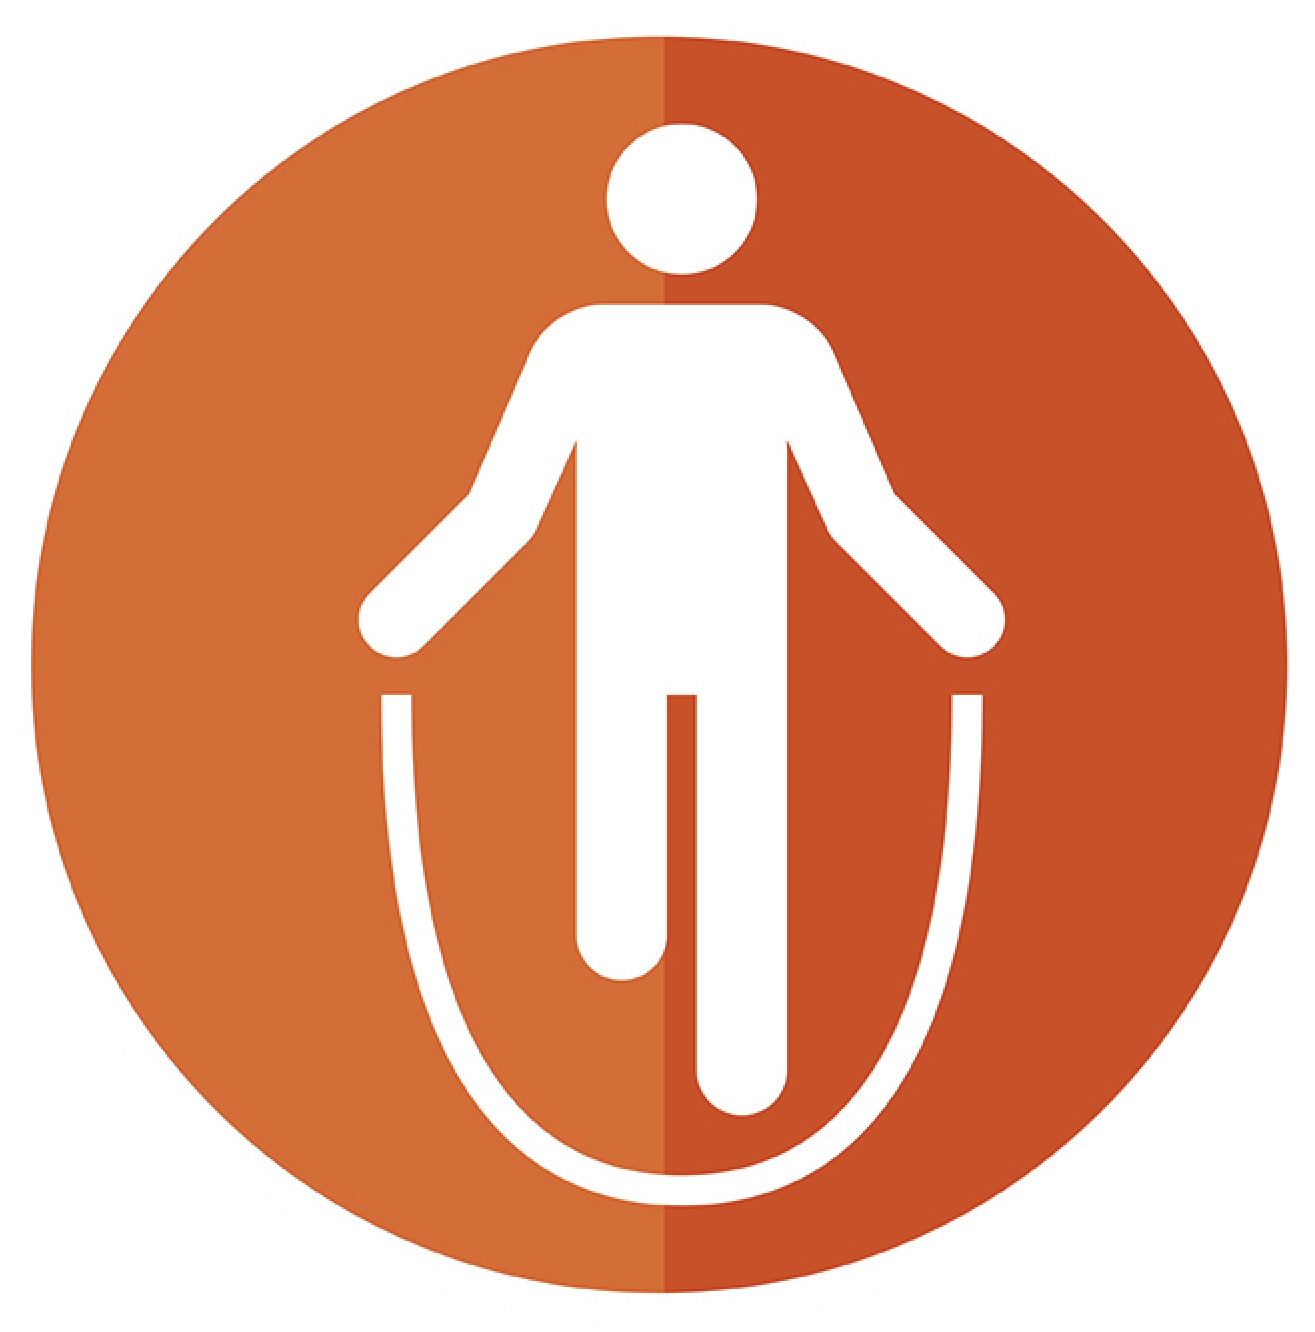 Person jumping rope orange vector image